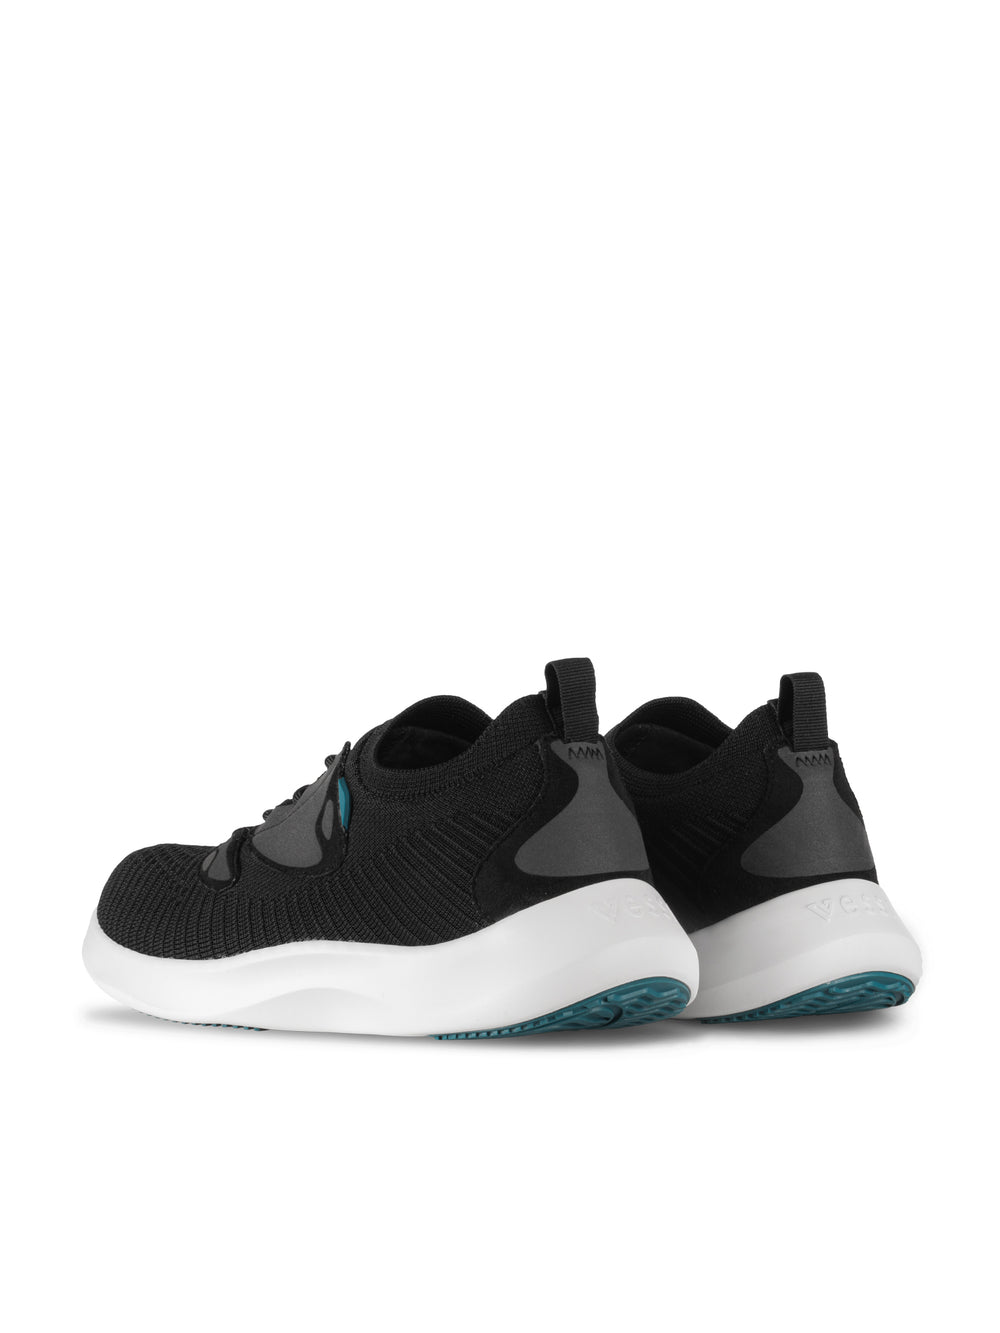 WOMENS VESSI EVERYDAY MOVE SNEAKER